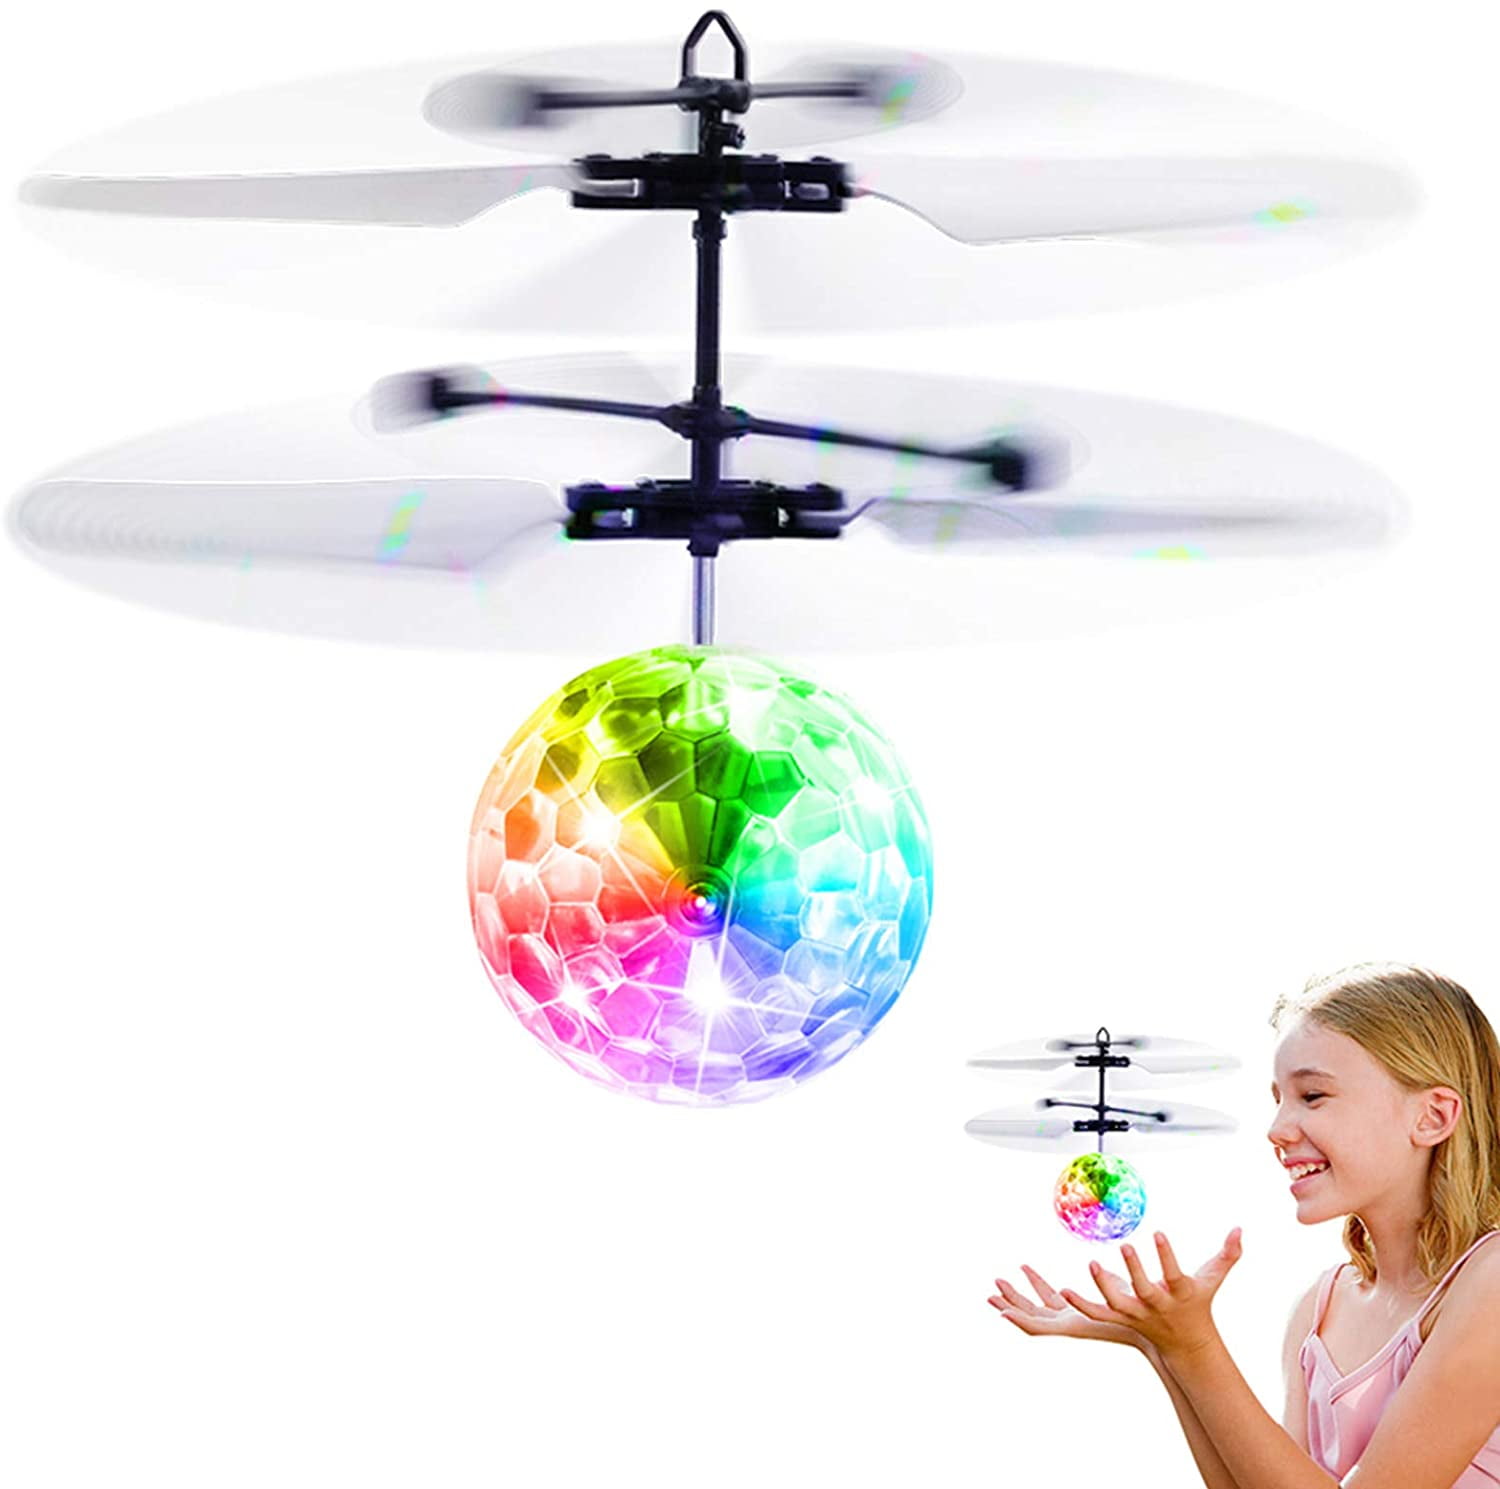 Infrared Induction Flying Toy Built-in LED Light Helicopter Rechargeable Shinning Flying Drone Indoor Outdoor Game for Kids Boys Girls Christmas Birthday Gift RC Flying Ball with Remote Controller